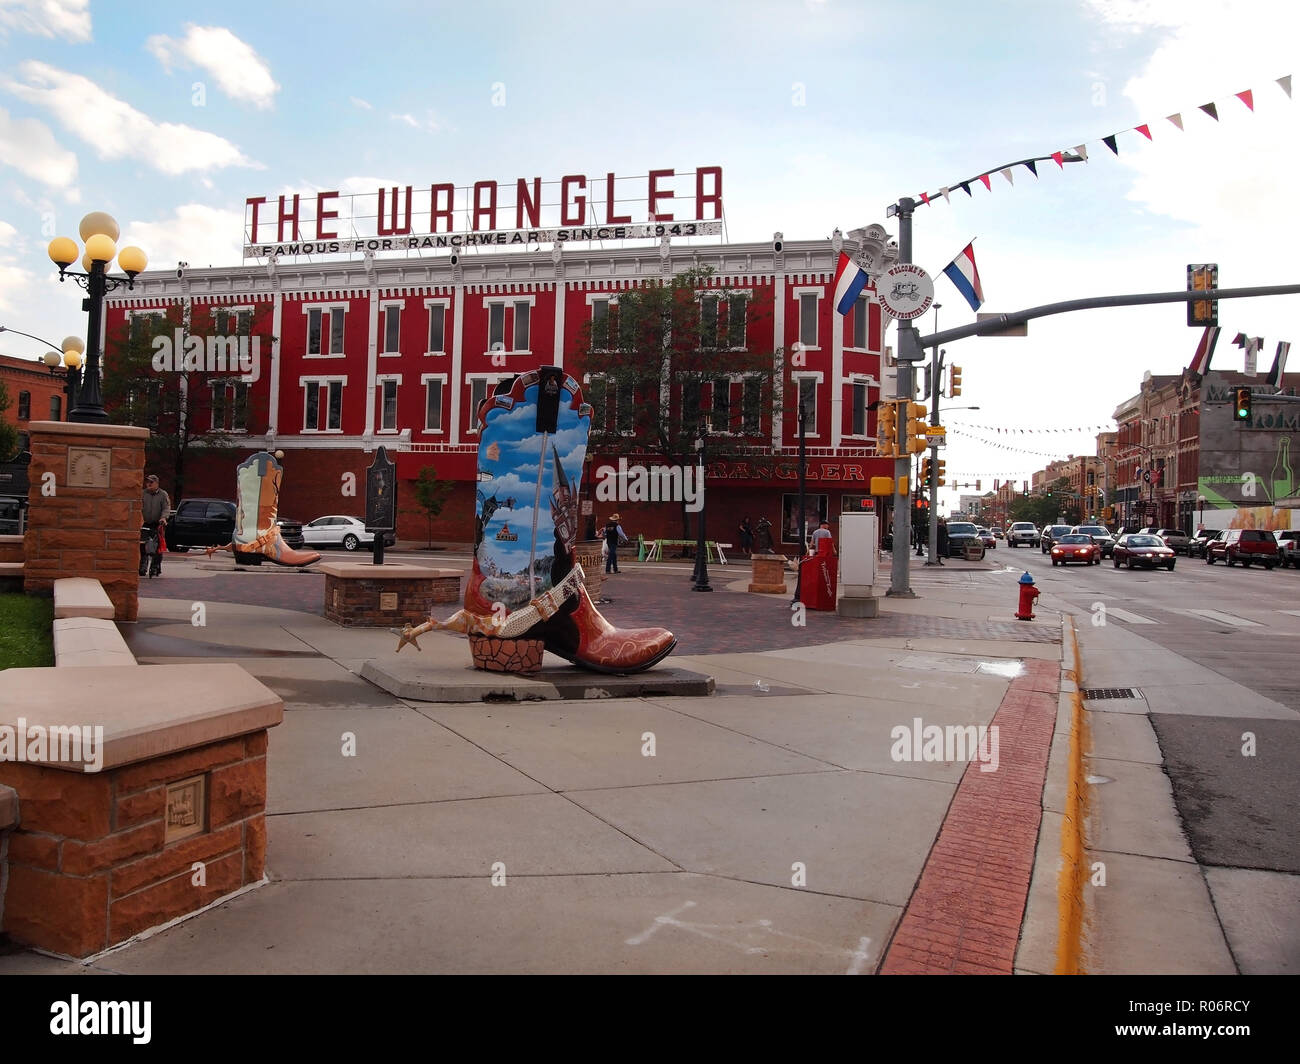 CHEYENNE, WY - JULY 25, 2018: The Wrangler western apparel shop and two of the 8 foot tall Cheyenne Big Boots, featuring local art work depicting Chey Stock Photo